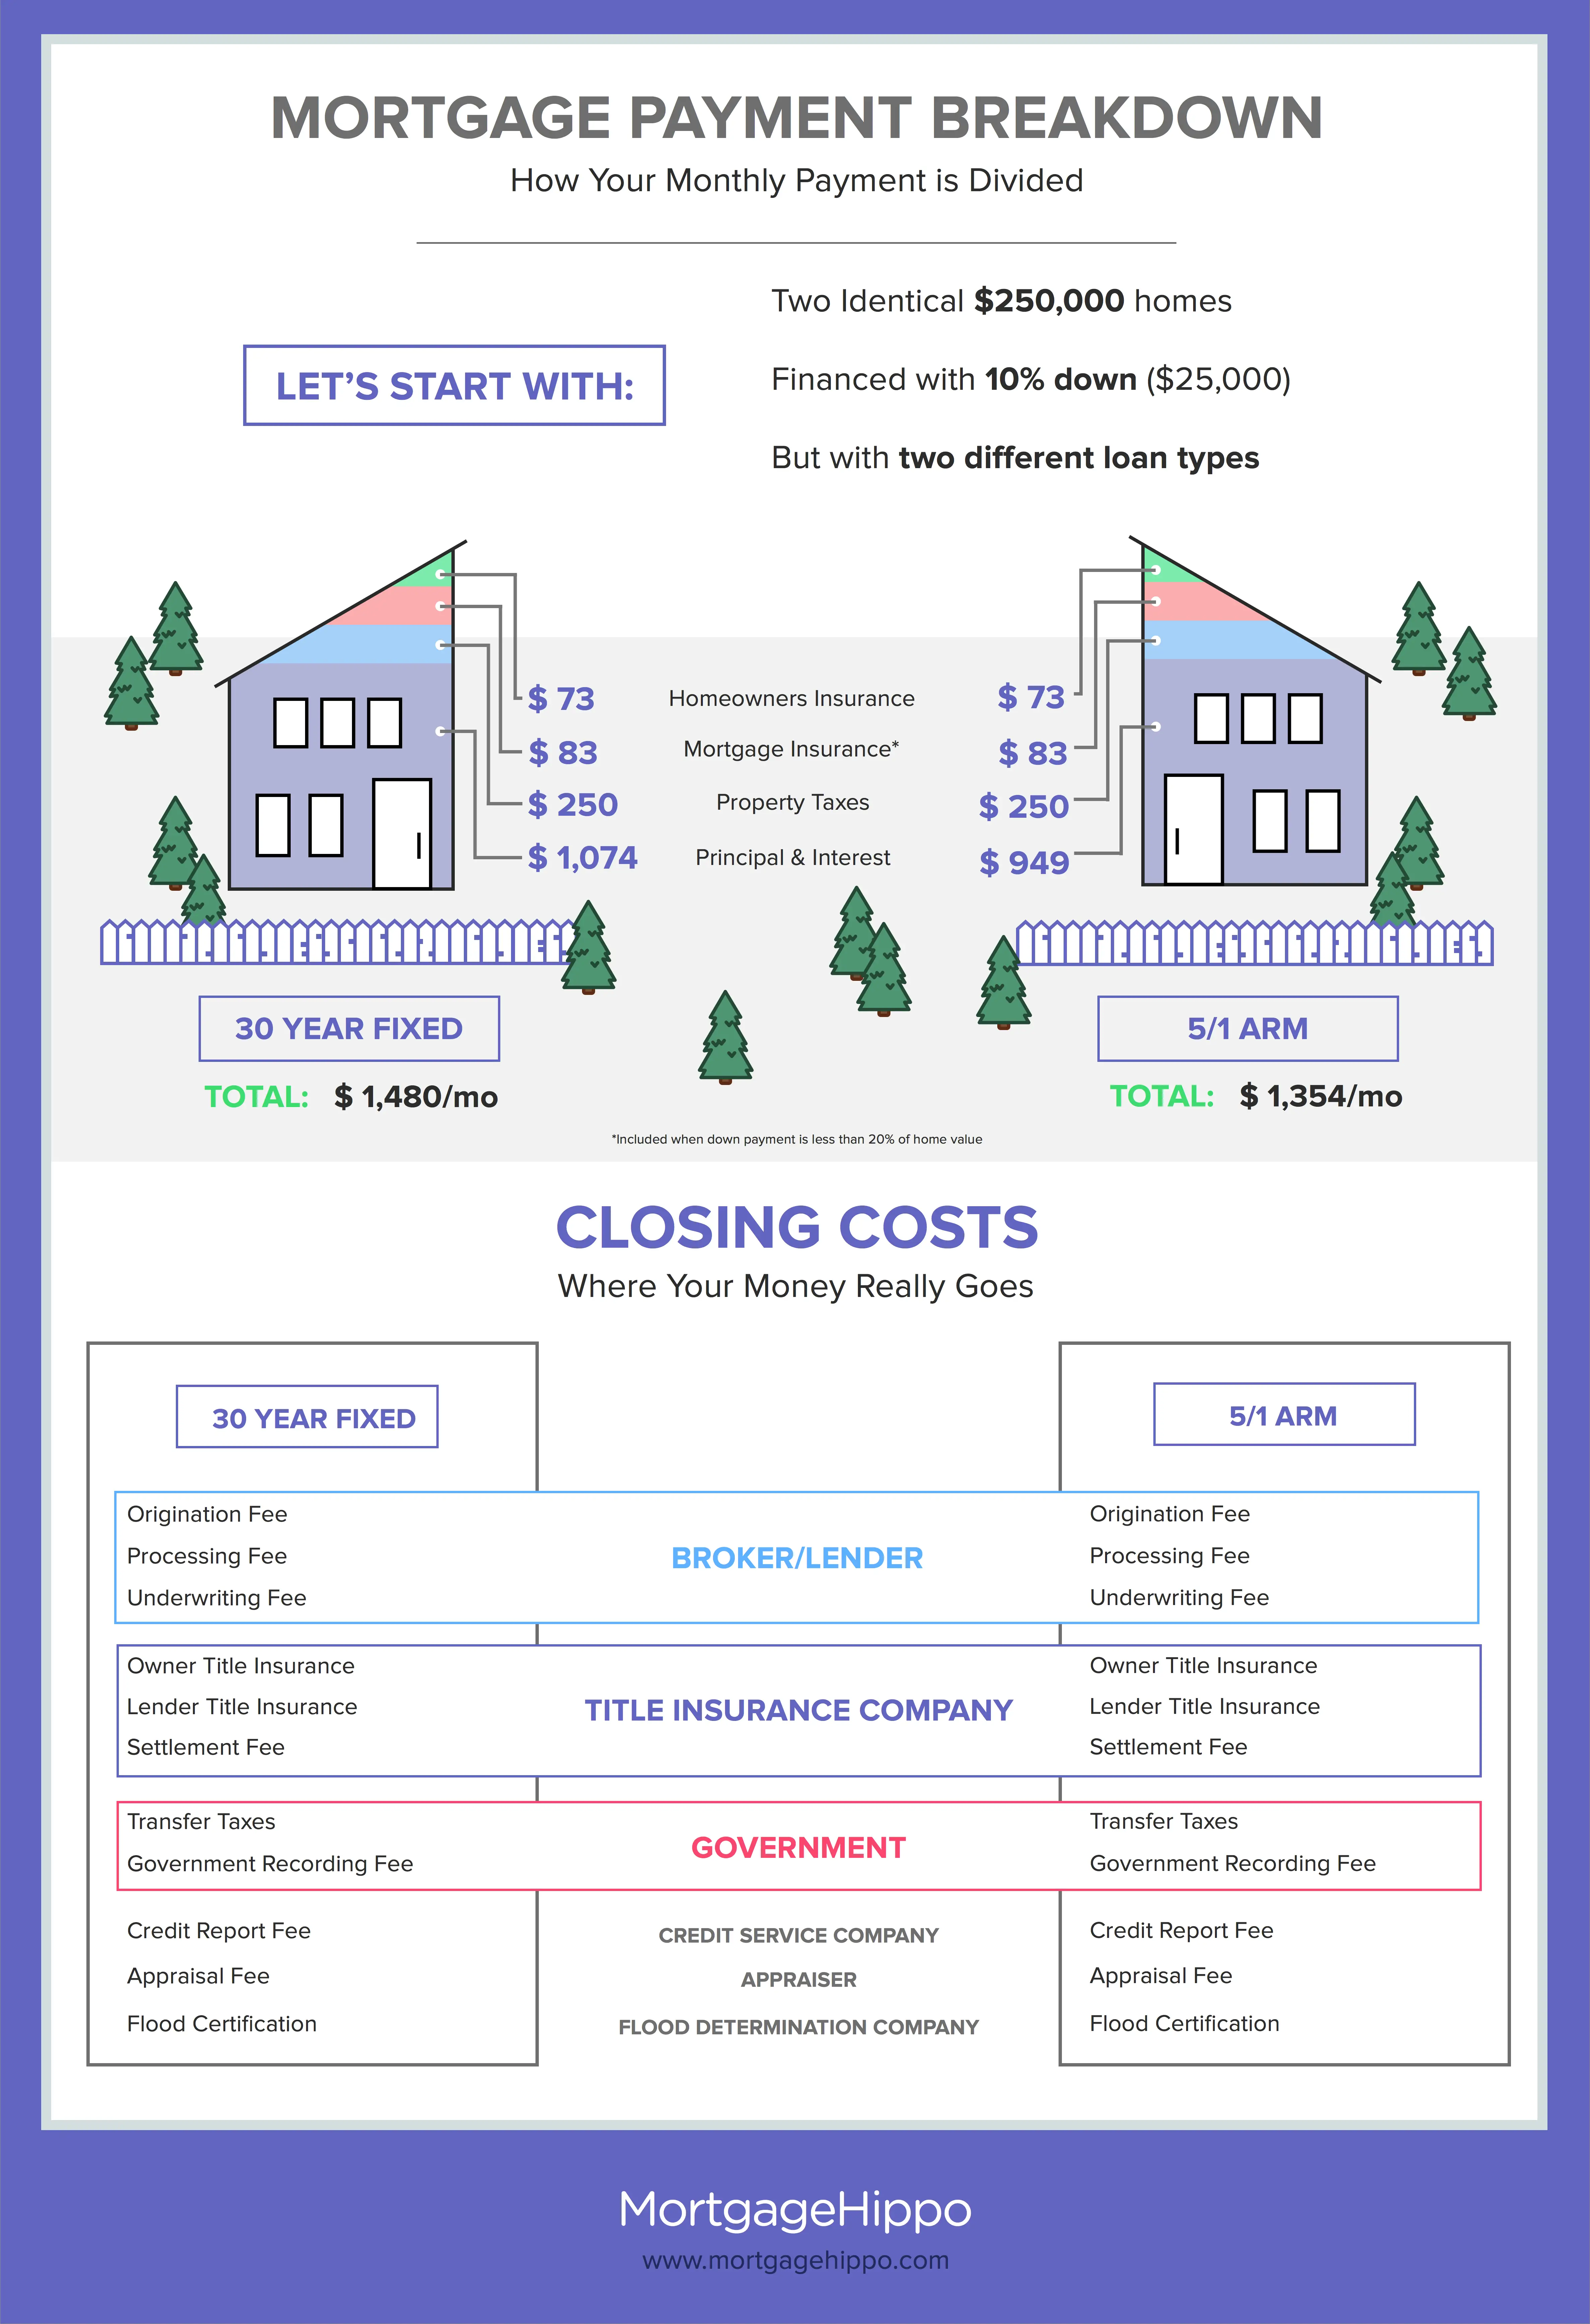 Monthly Mortgage Payment and Closing Costs Breakdown â MortgageHippo